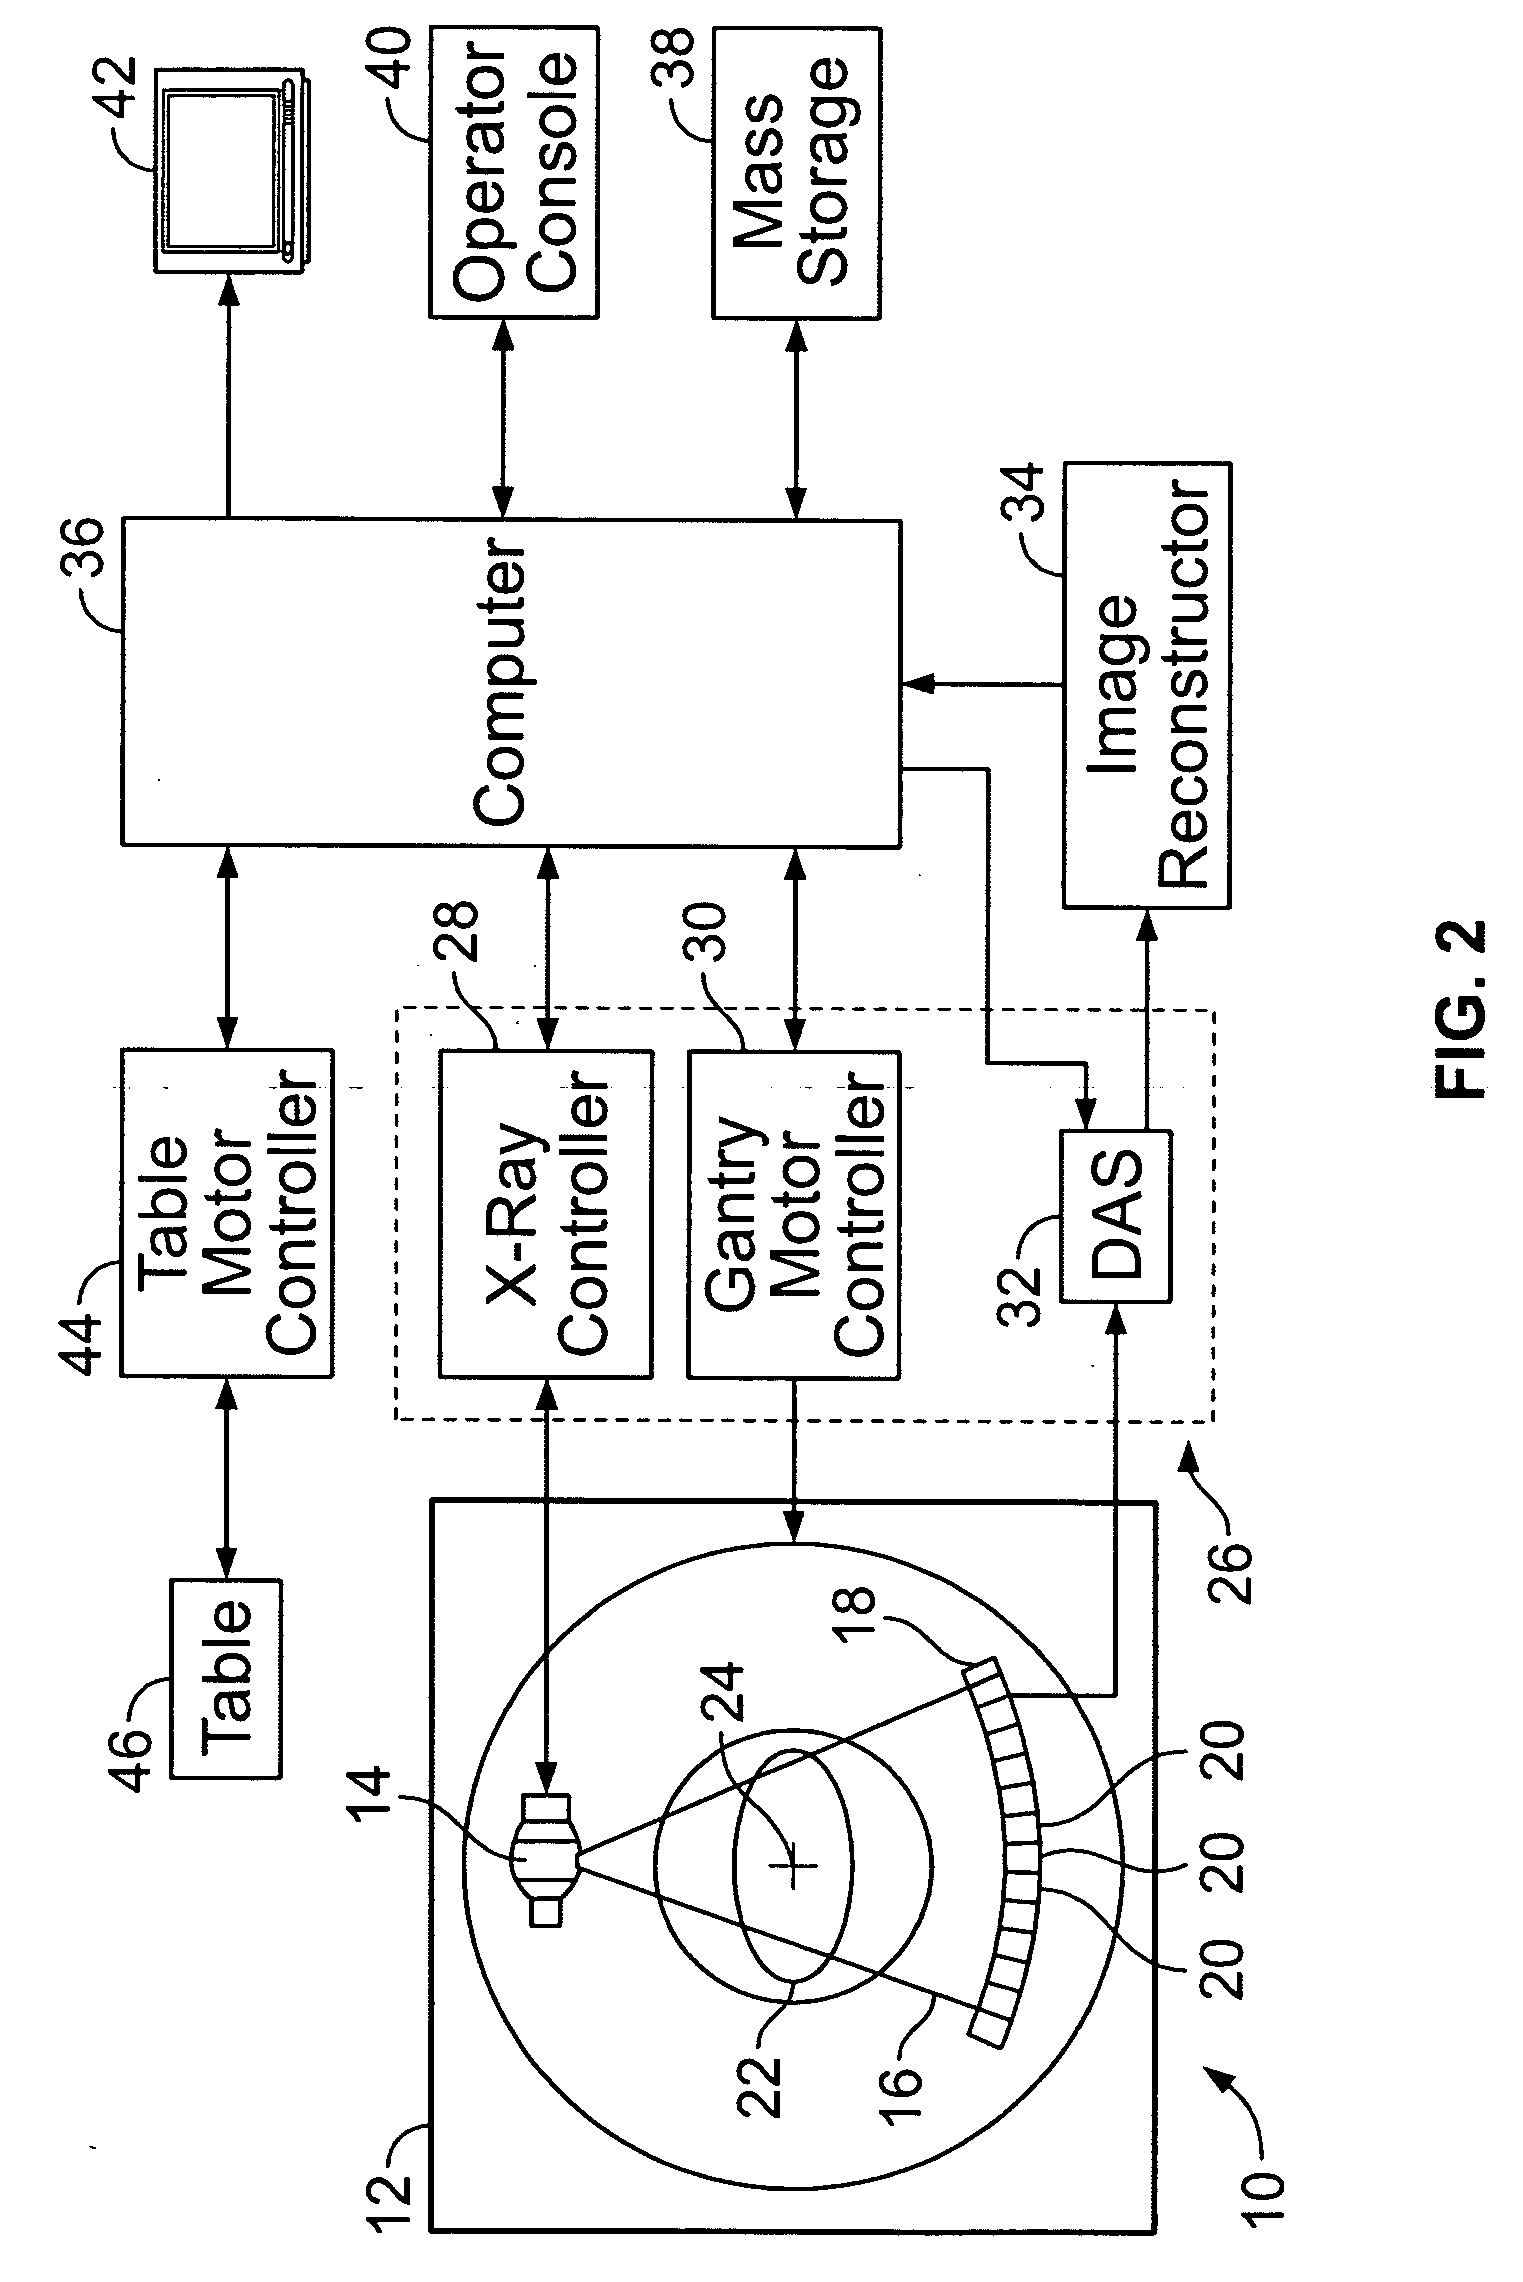 Methods and systems for monitoring tumor burden